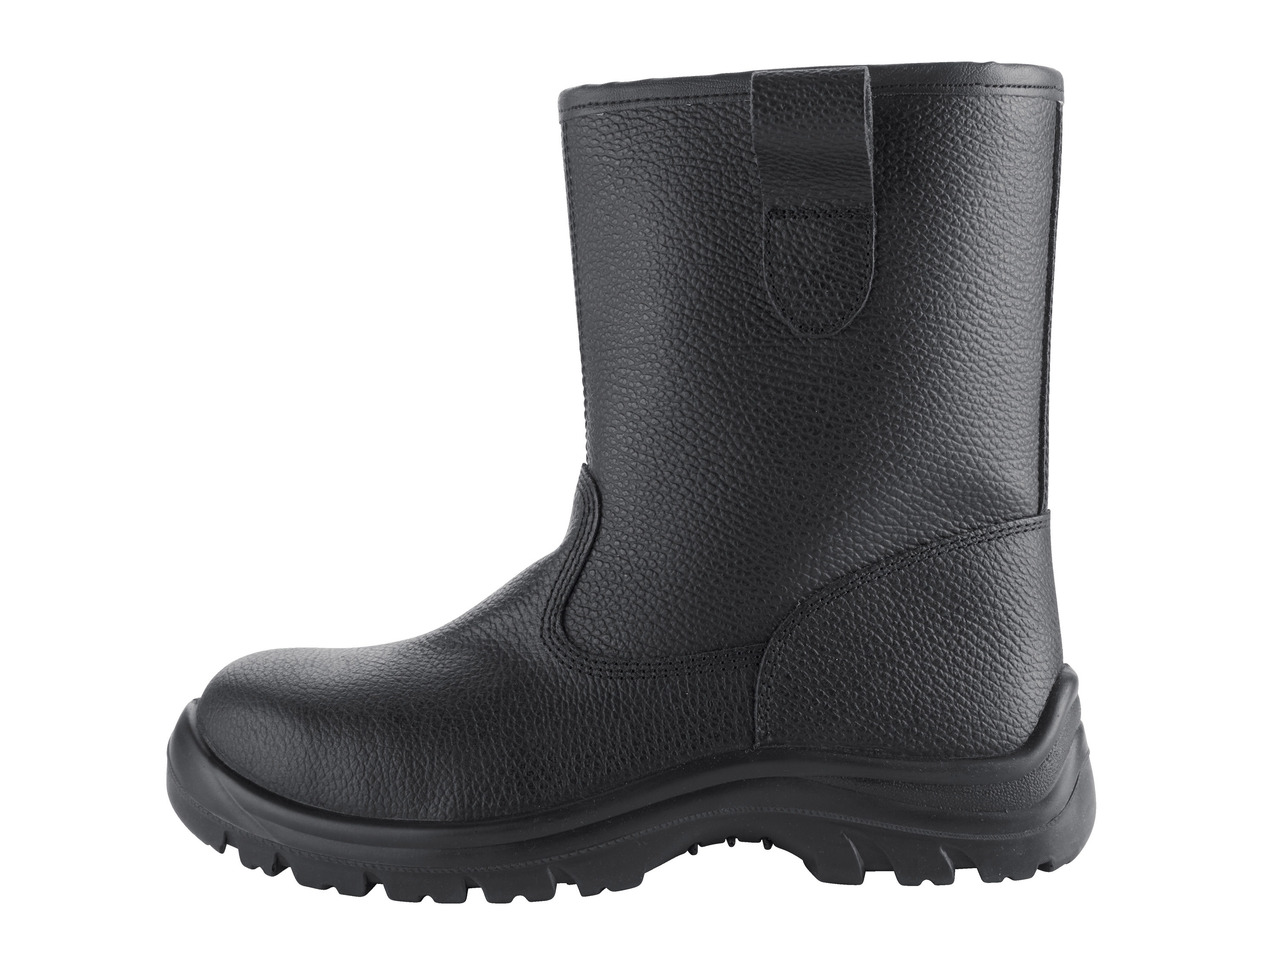 powerfix s3 leather safety boots